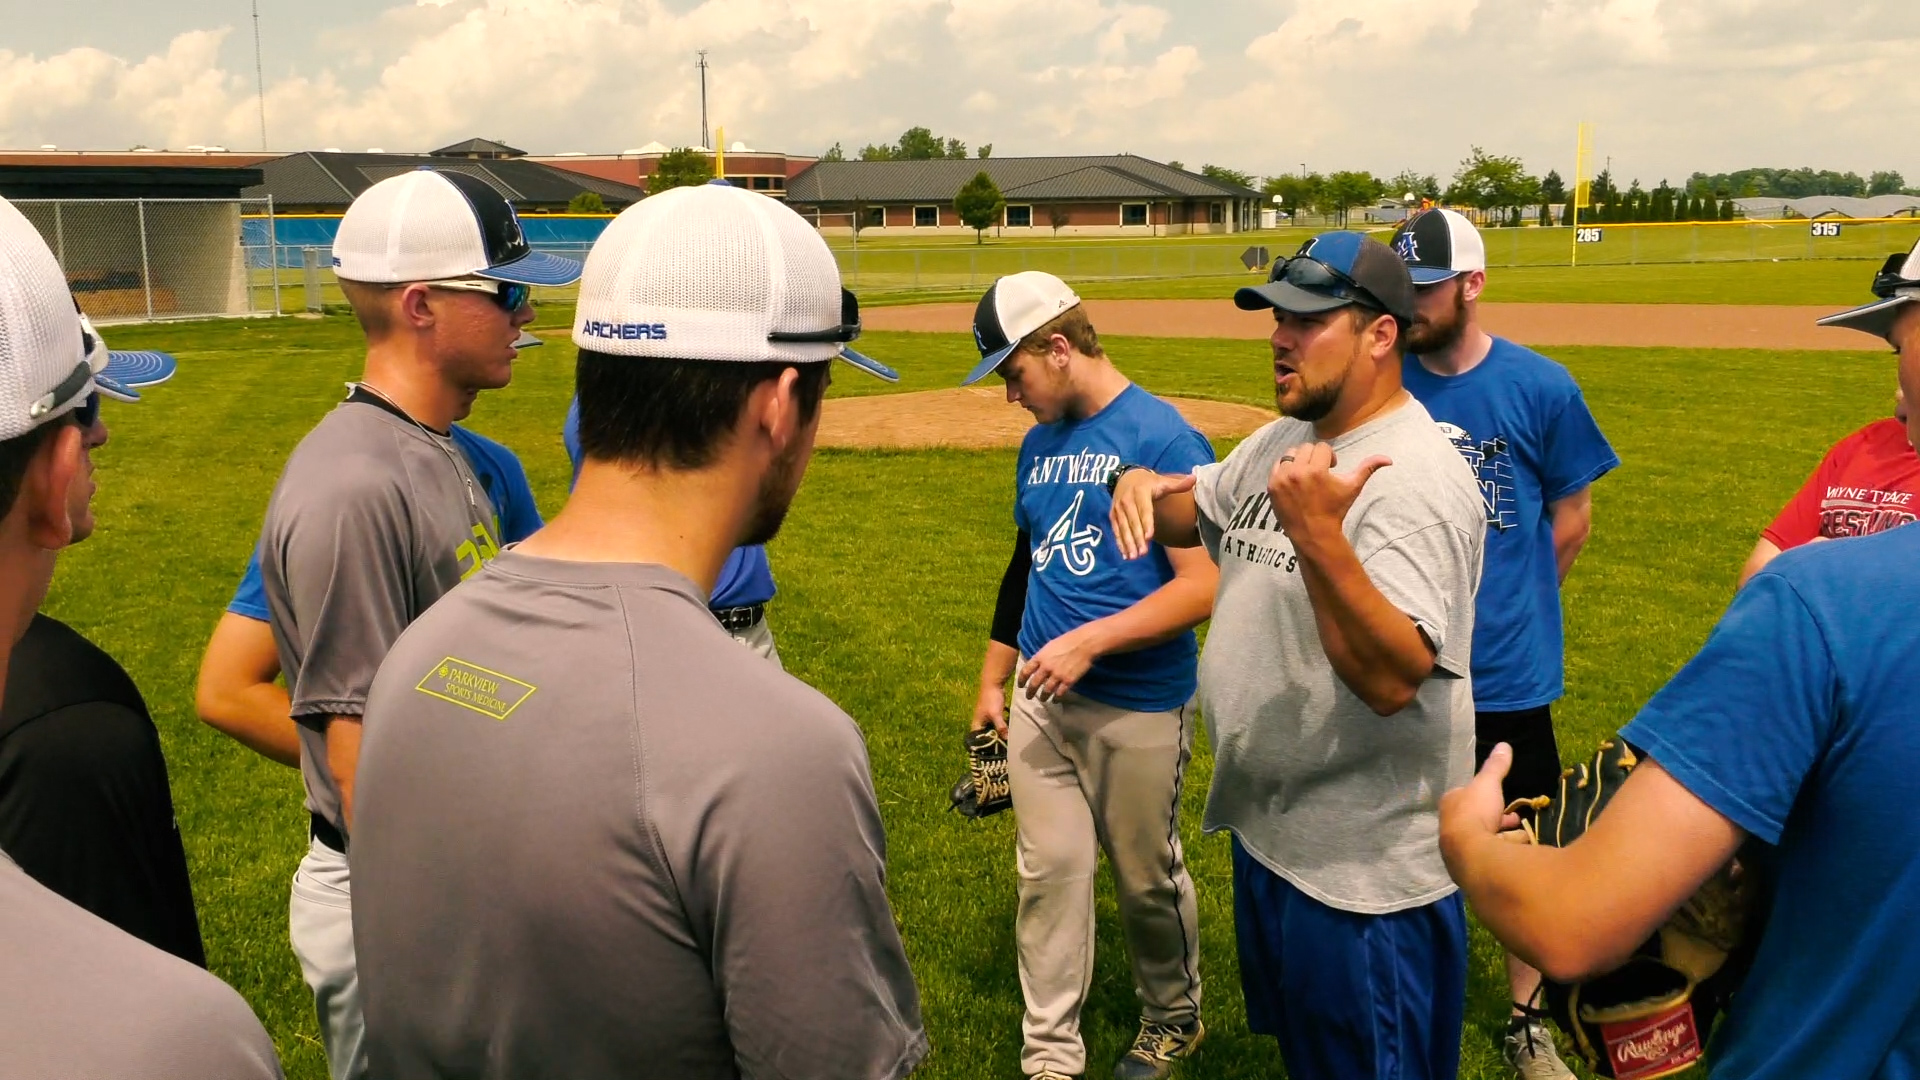 Antwerp enters first baseball state finals with confidence